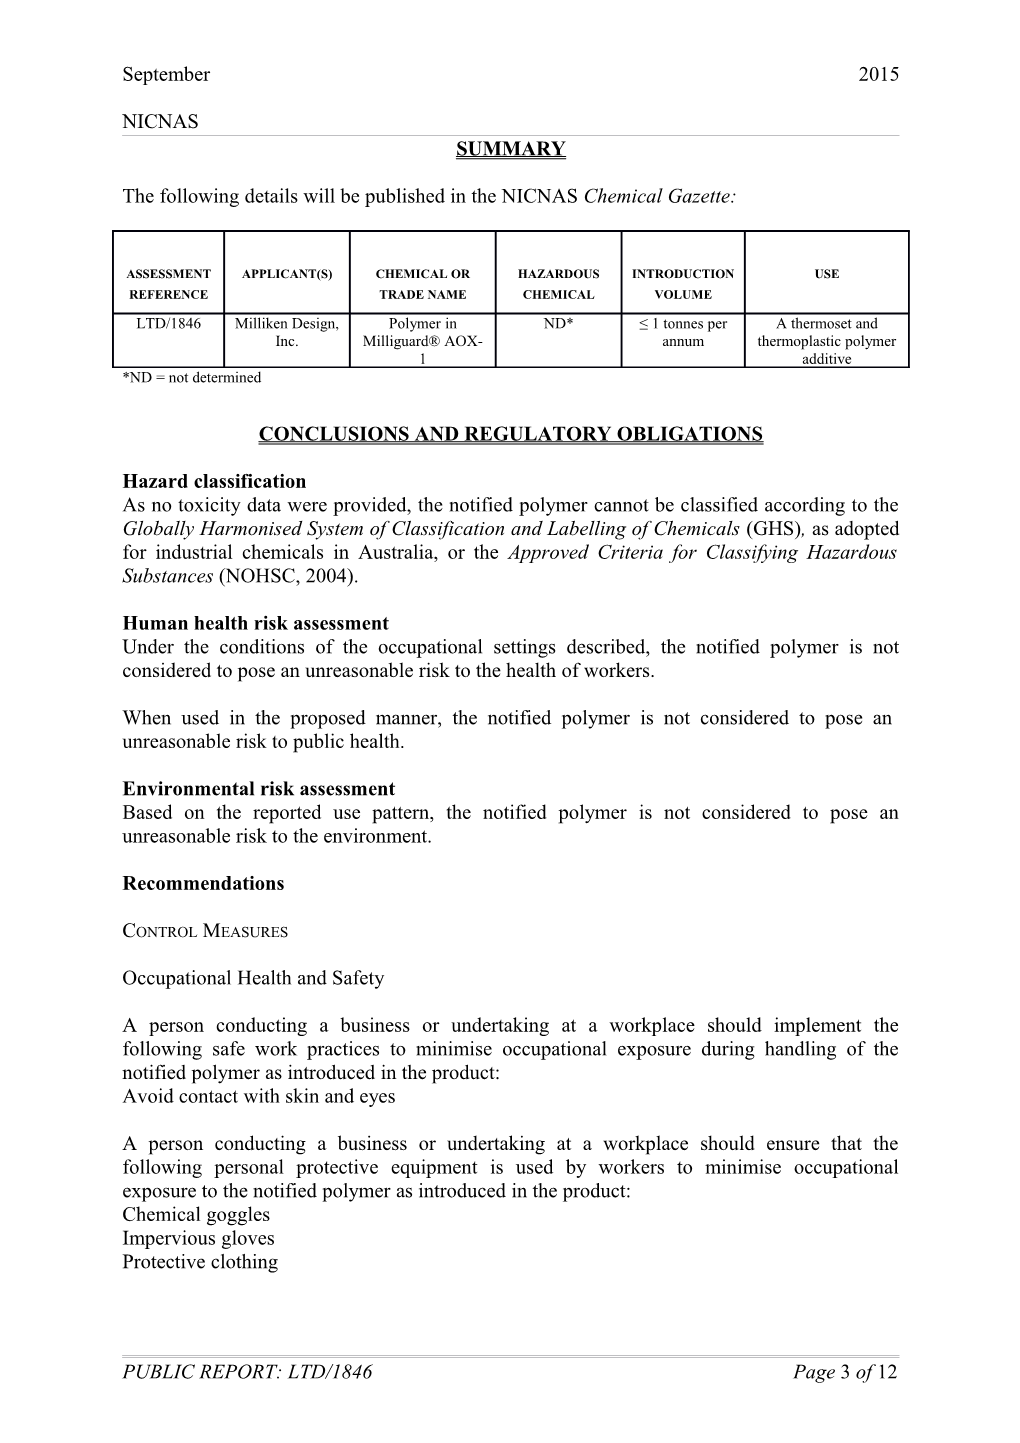 National Industrial Chemicals Notification and Assessment Scheme s29